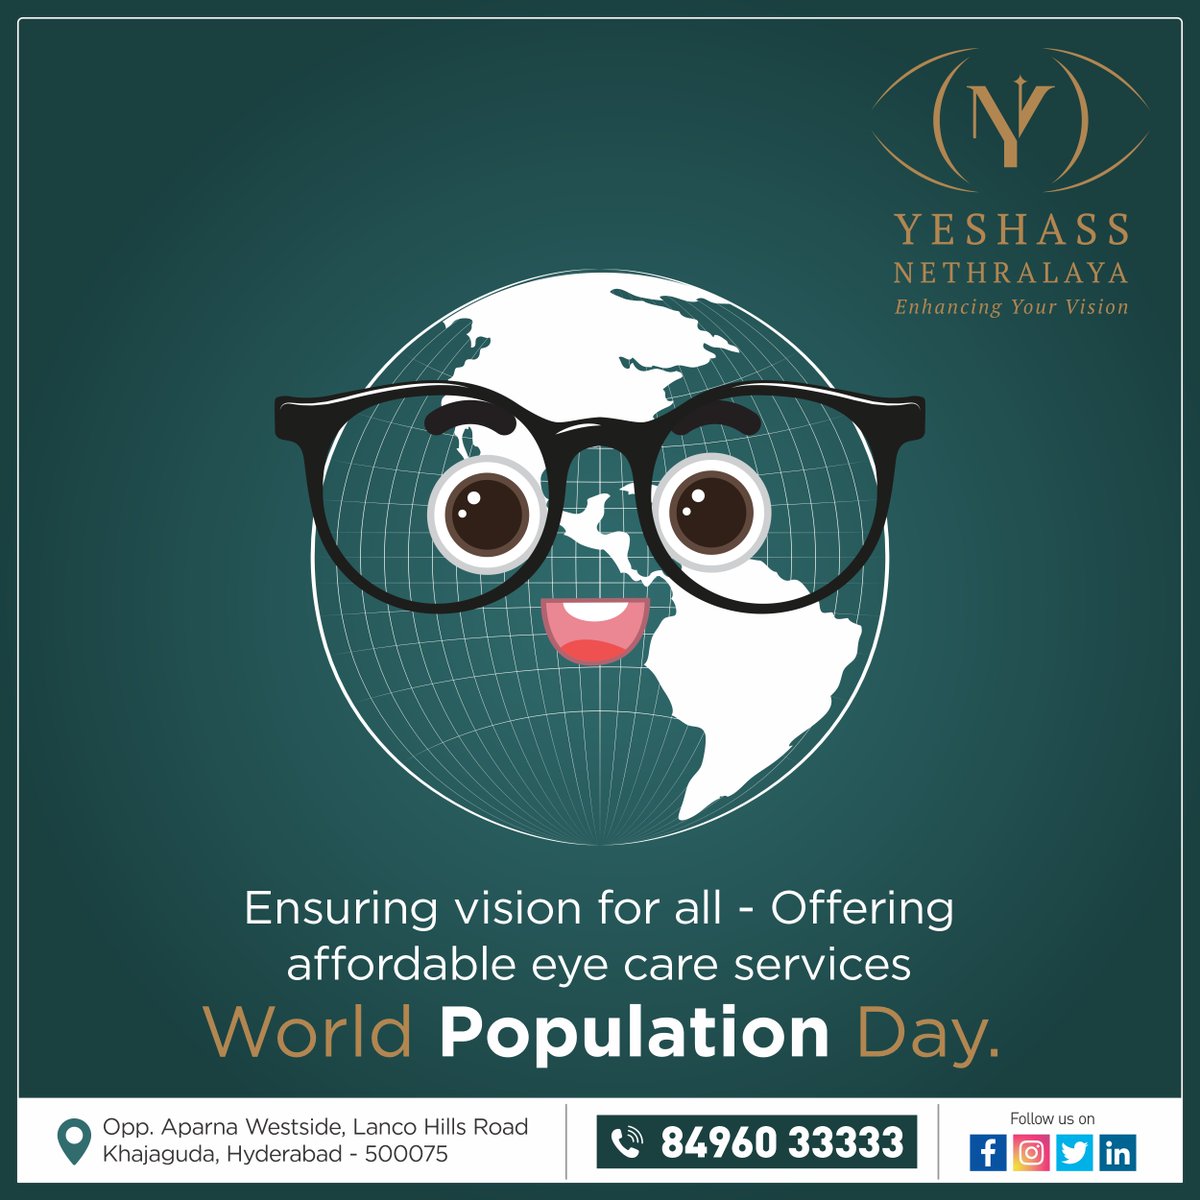 Celebrating #WorldPopulationDay! 
Did you know that millions of people worldwide suffer from #visionimpairments that could be prevented or treated? Together, let's ensure that everyone has access to quality #eyecareservices, regardless of their background.

Call Now: 84960 33333